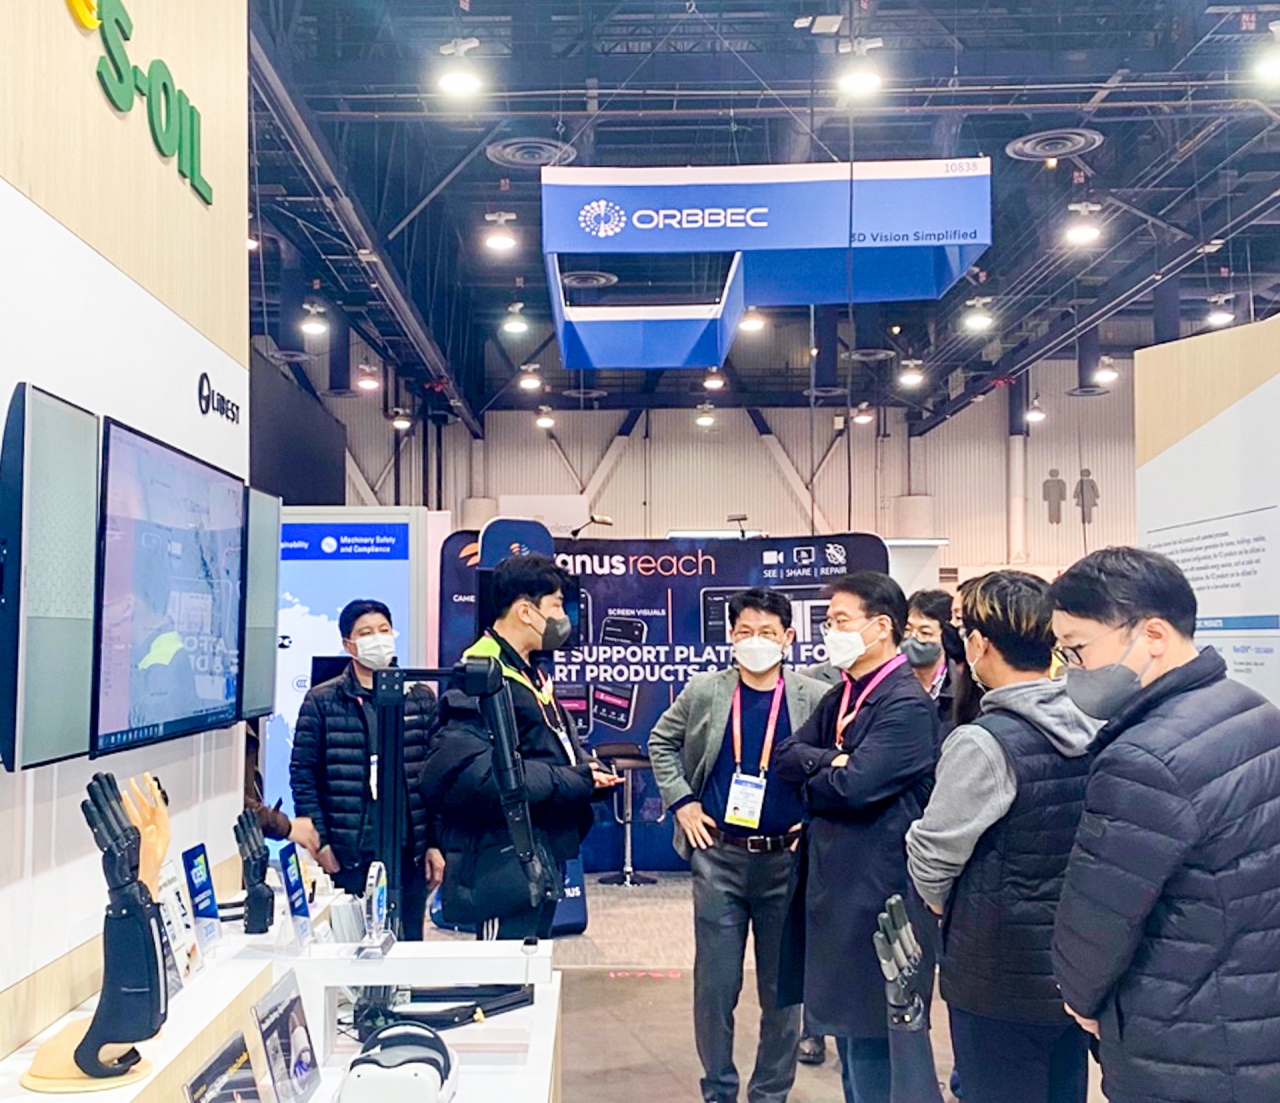 S-Oil President Ryu Yul (third from right) visits CES 2023’s S-Oil booth for the presentation of venture companies’ products that were supported by S-Oil. (S-Oil)